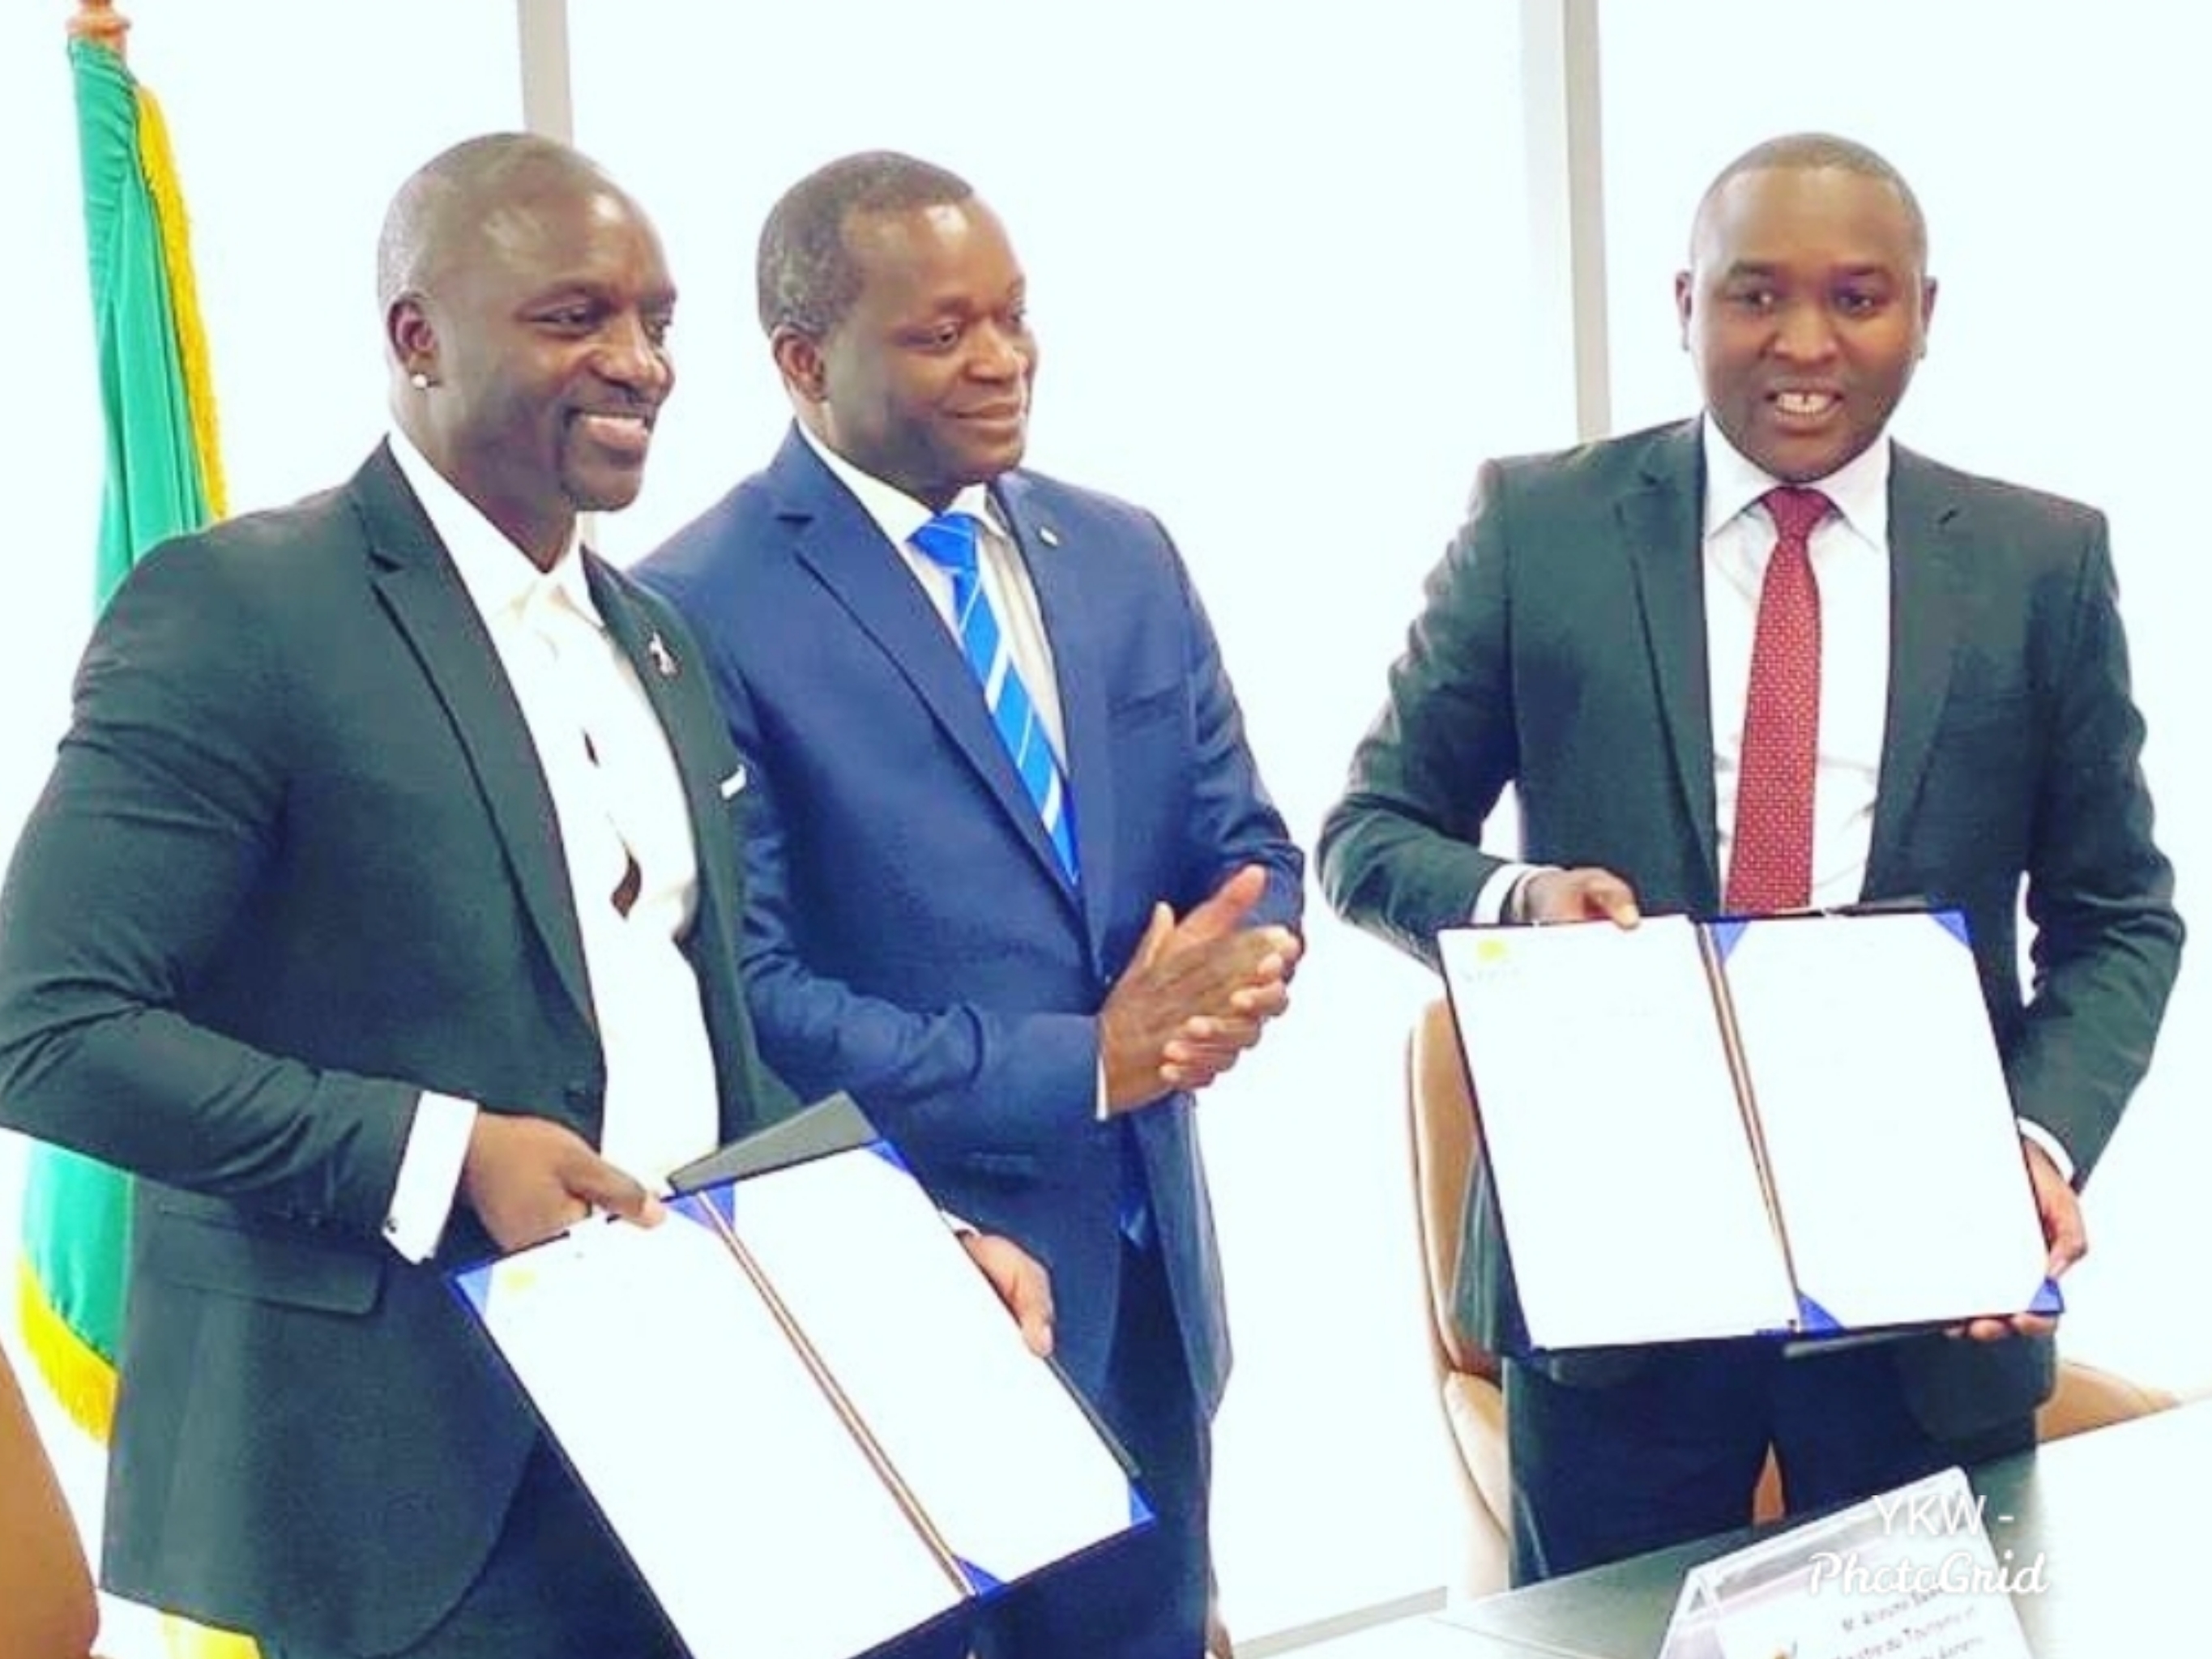 Akon Officially Finalizes Agreement For His Own City In Senegal